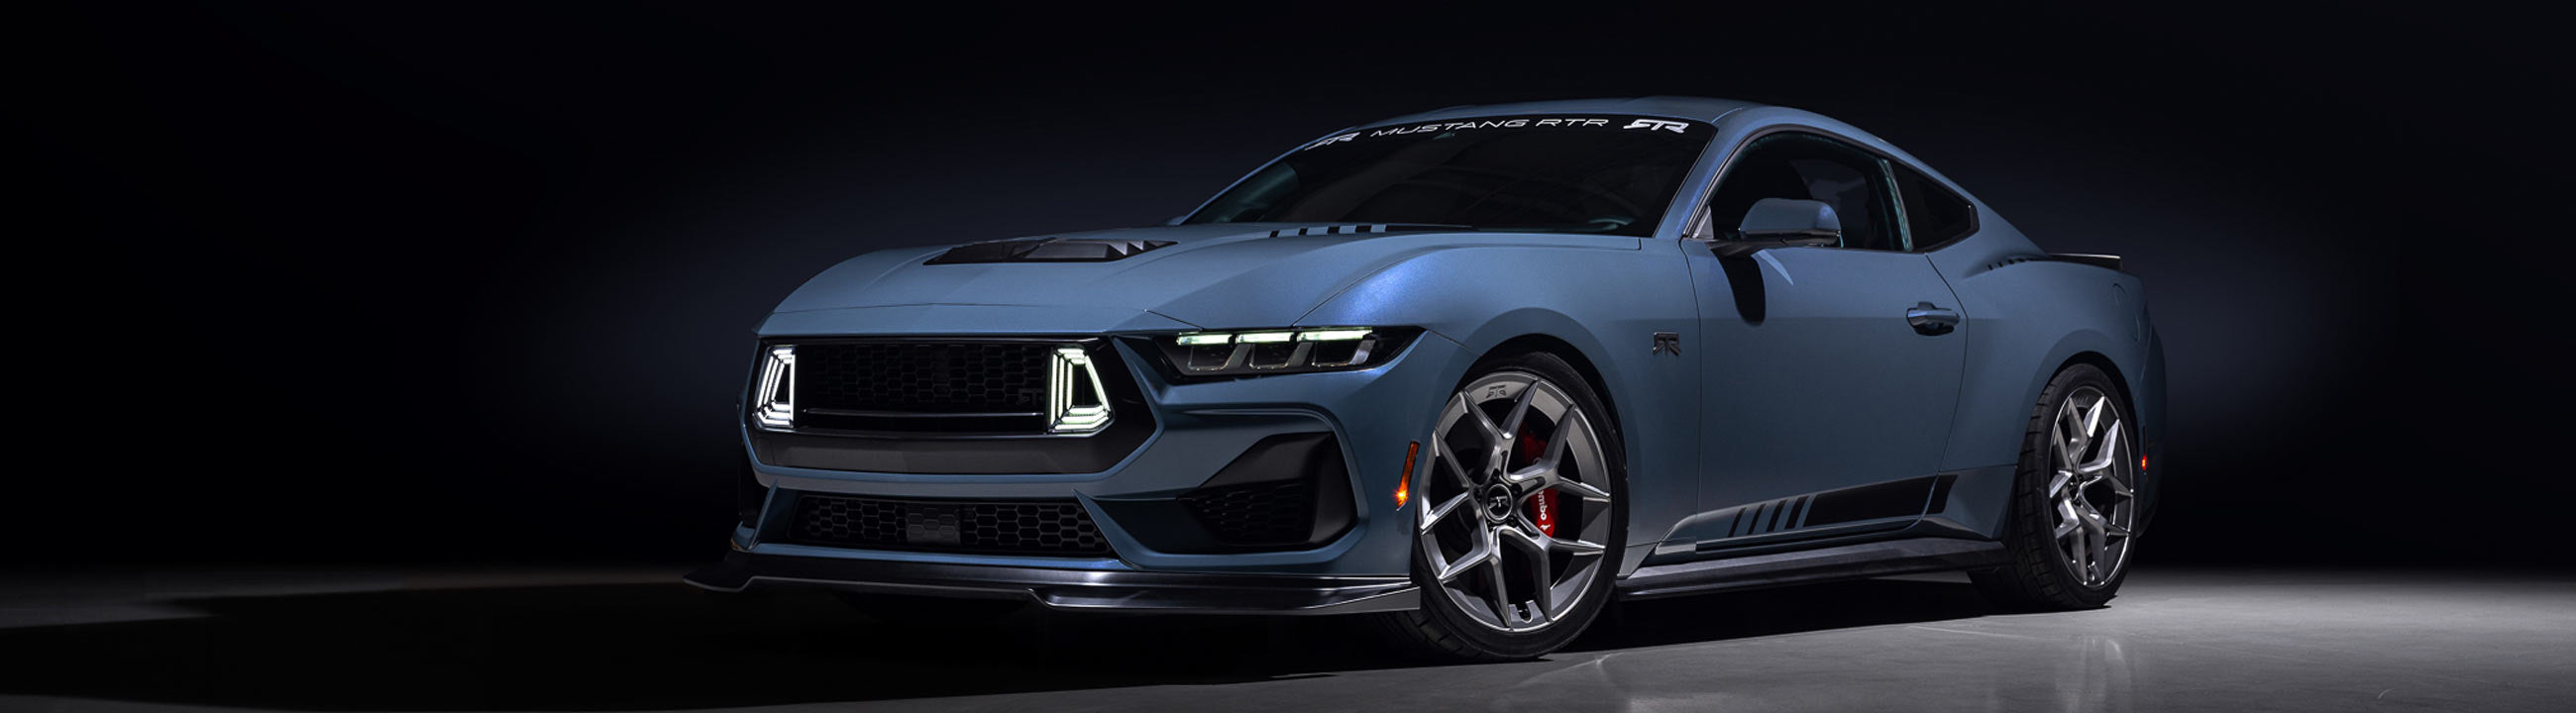 2022 Ford Mustang Accessories